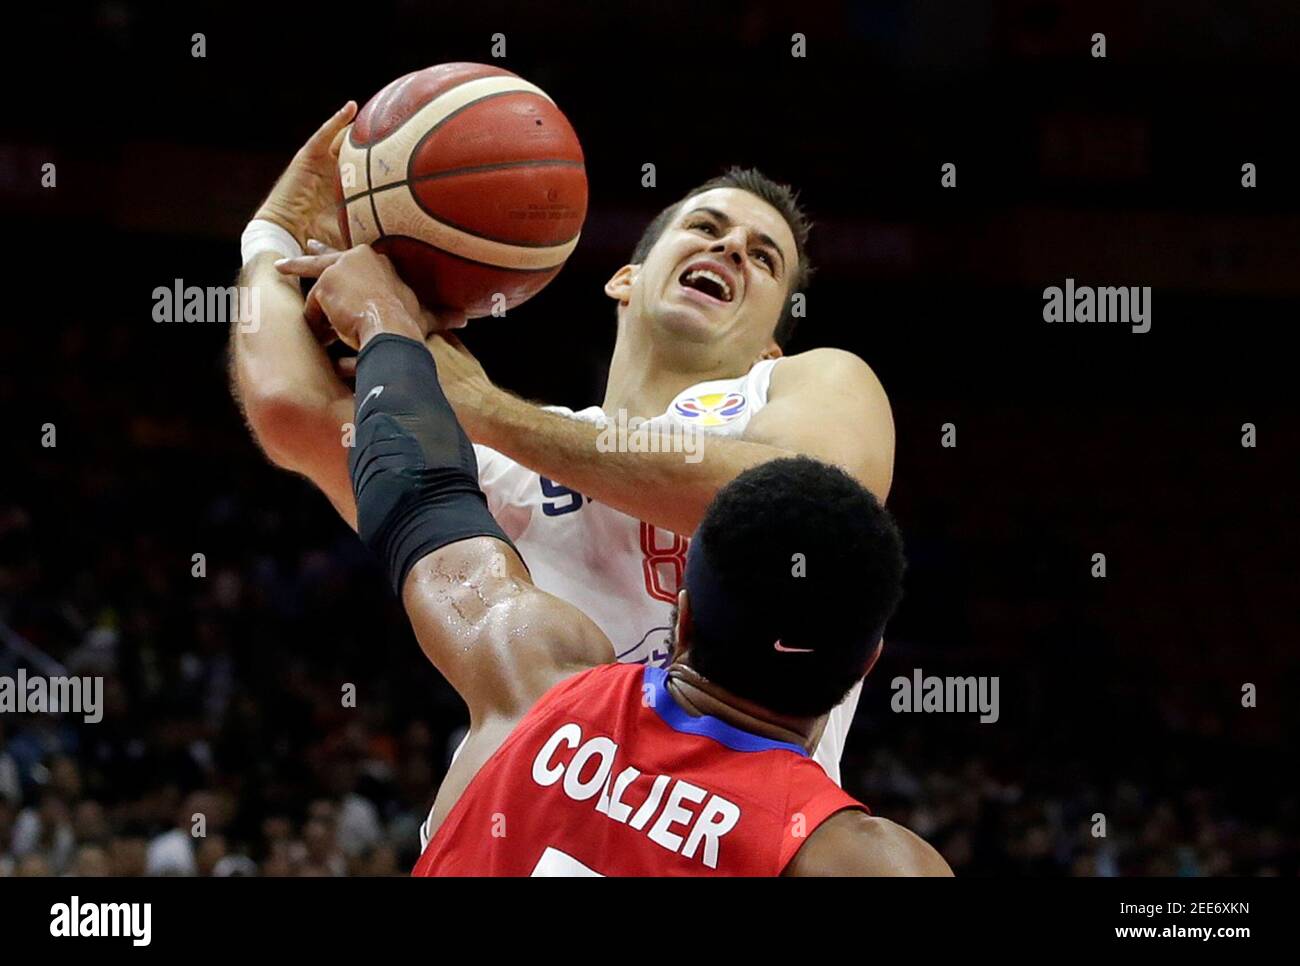 Basketball - FIBA World Cup - Second Round - Group J - Serbia v Puerto Rico - Wuhan Sports Centre, Wuhan, China - September 6, 2019  Serbia's Nemanja Bjelica in action with Puerto Rico's Devon Collier REUTERS/Jason Lee Stock Photo